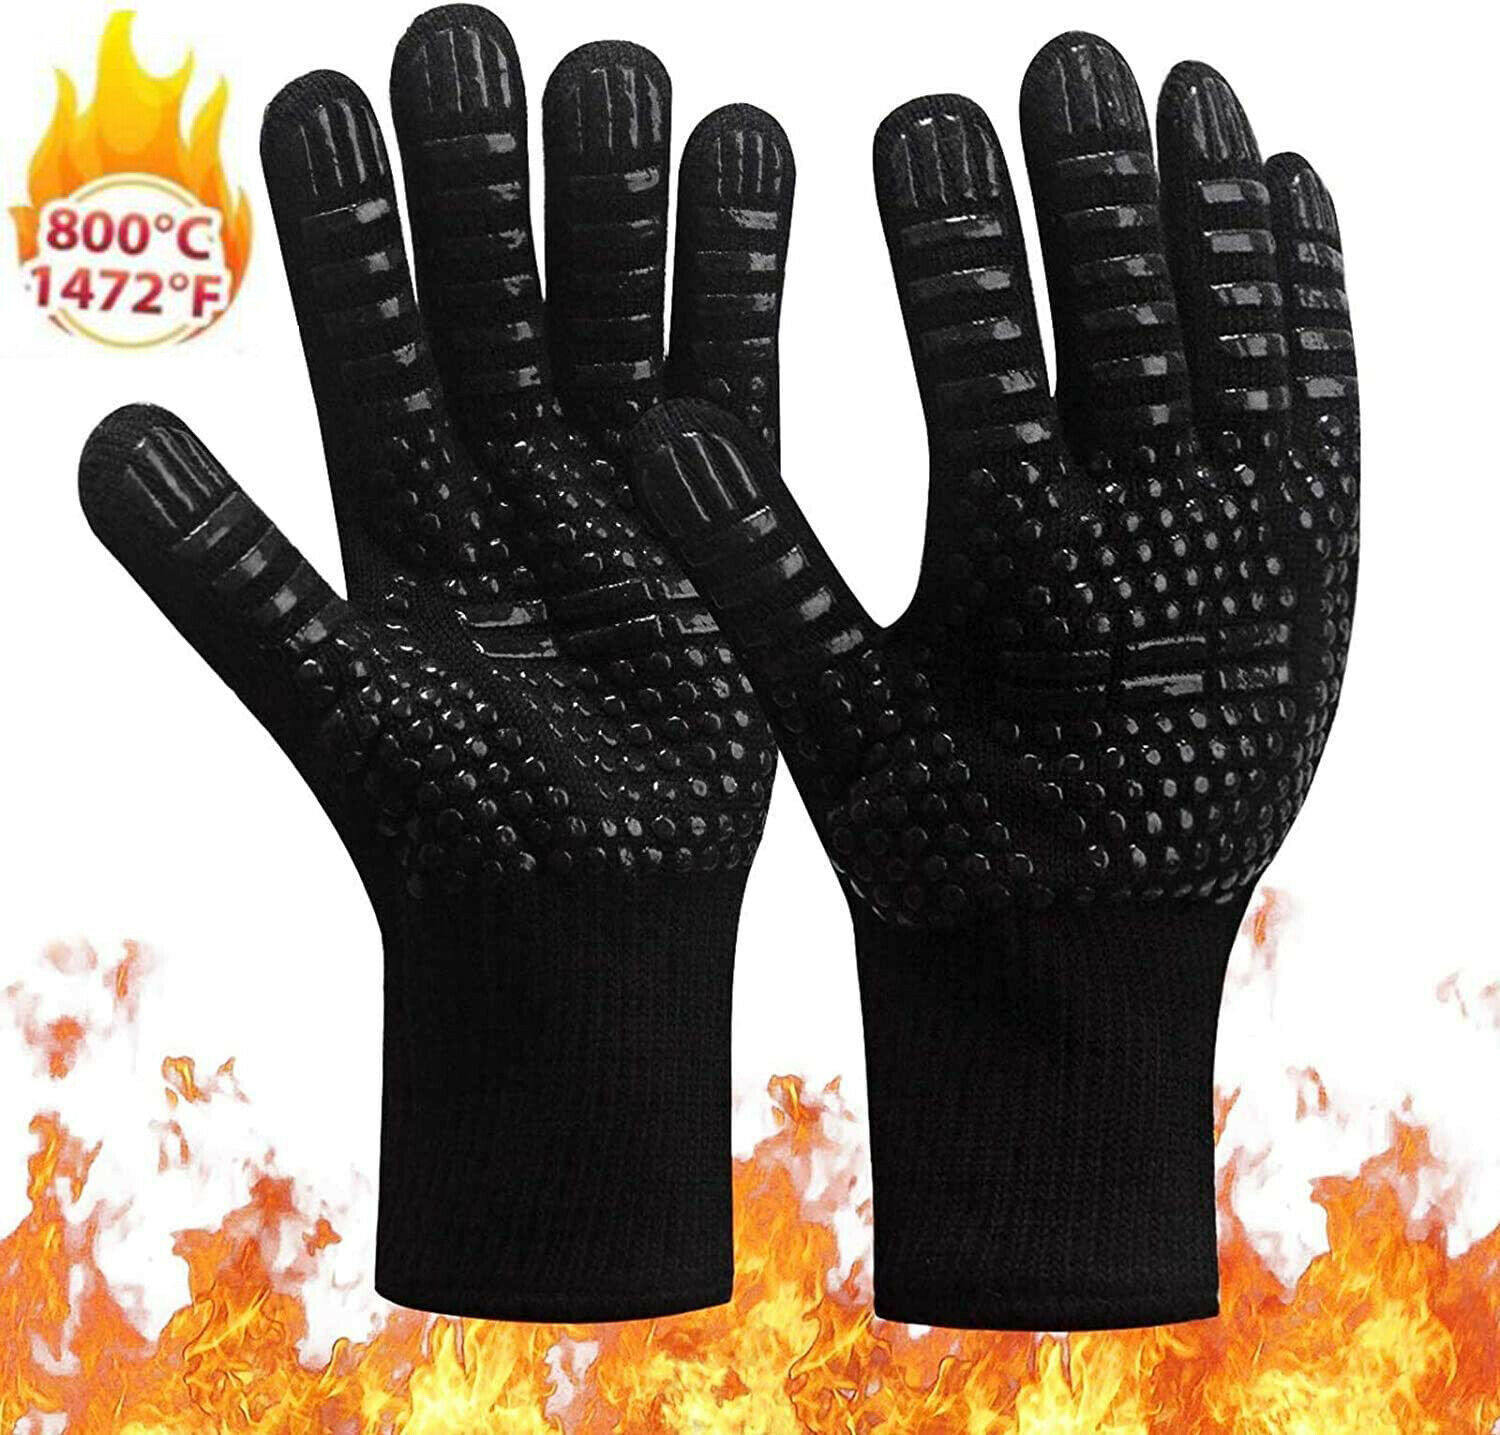 1 Pair 1472℉ Extreme Heat Resistant Cooking Oven Gloves Silicone Grill Bbq Mitts